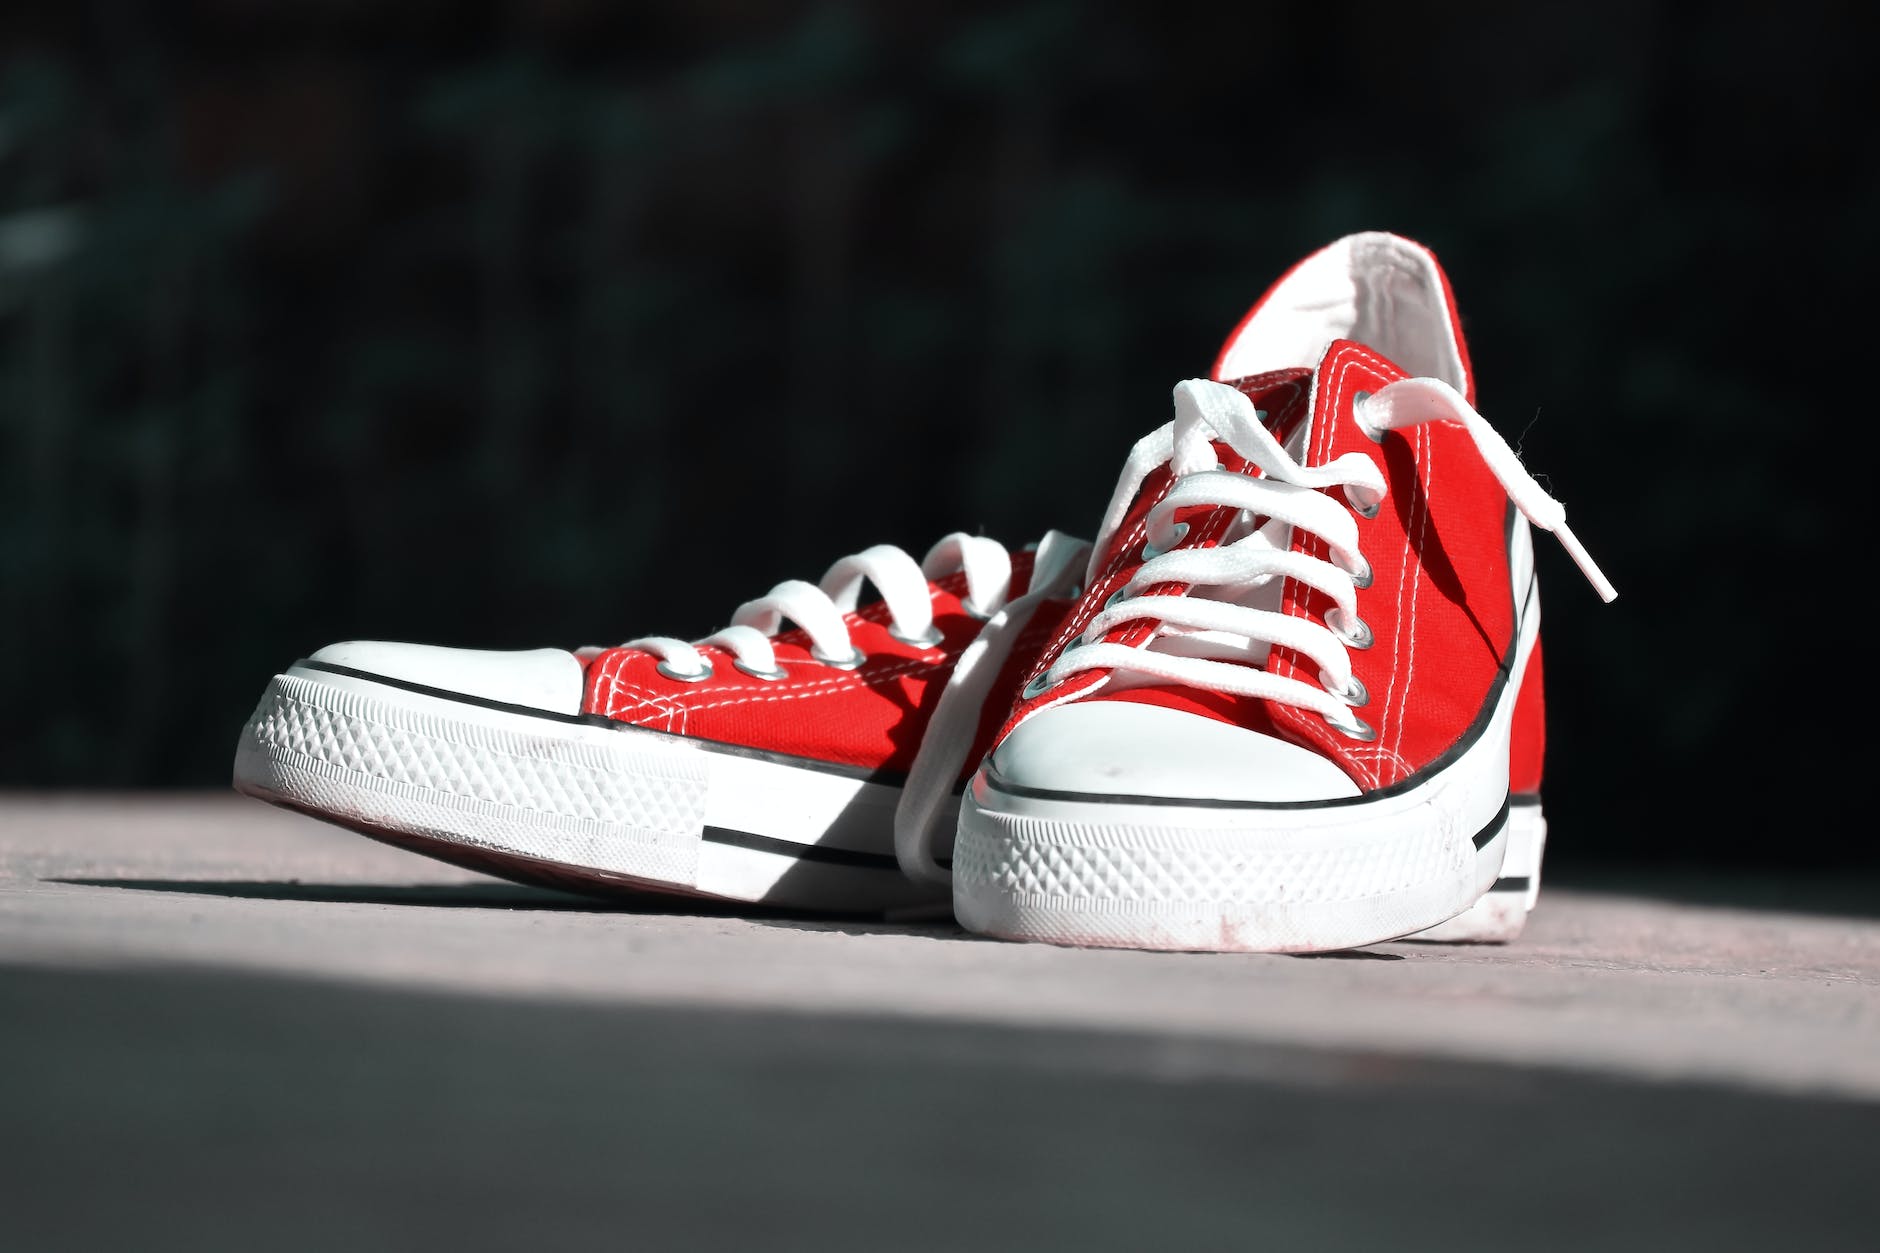 shallow focus photography of pair of red low top sneakers